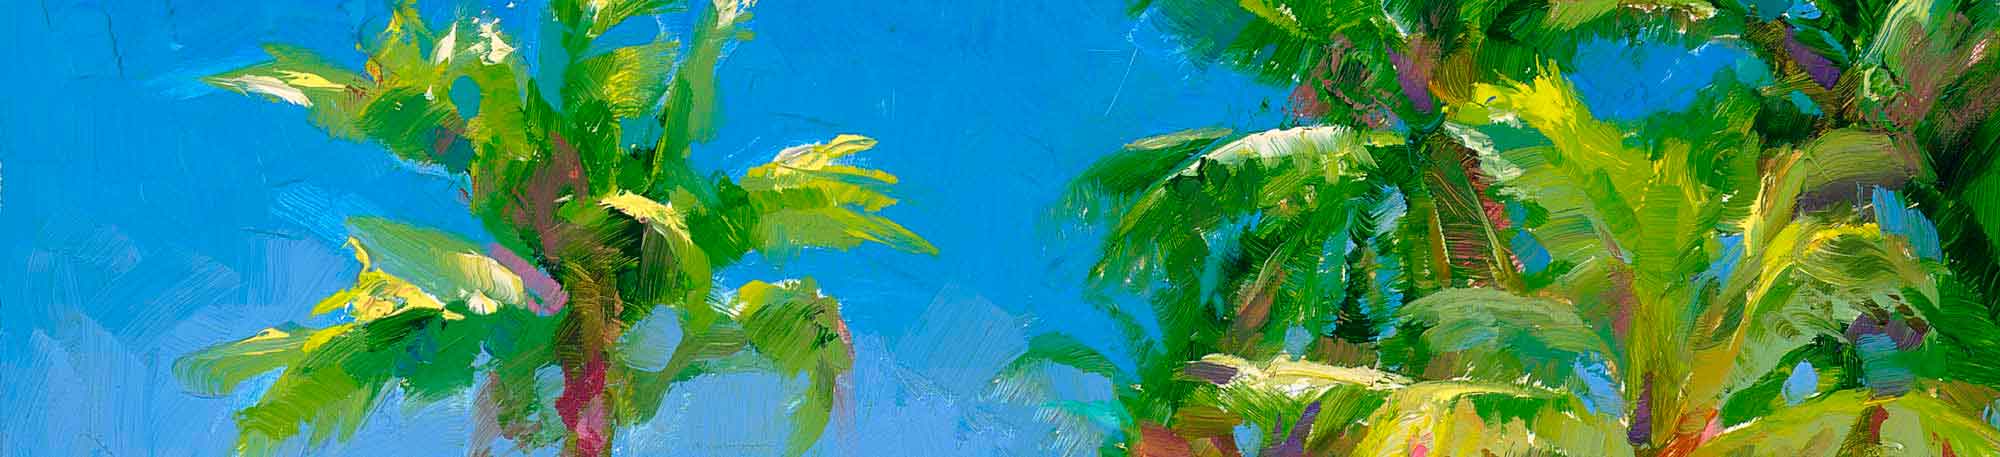 Crop of palm tree painting of tropical beach landscape art by artist Karen Whitworth